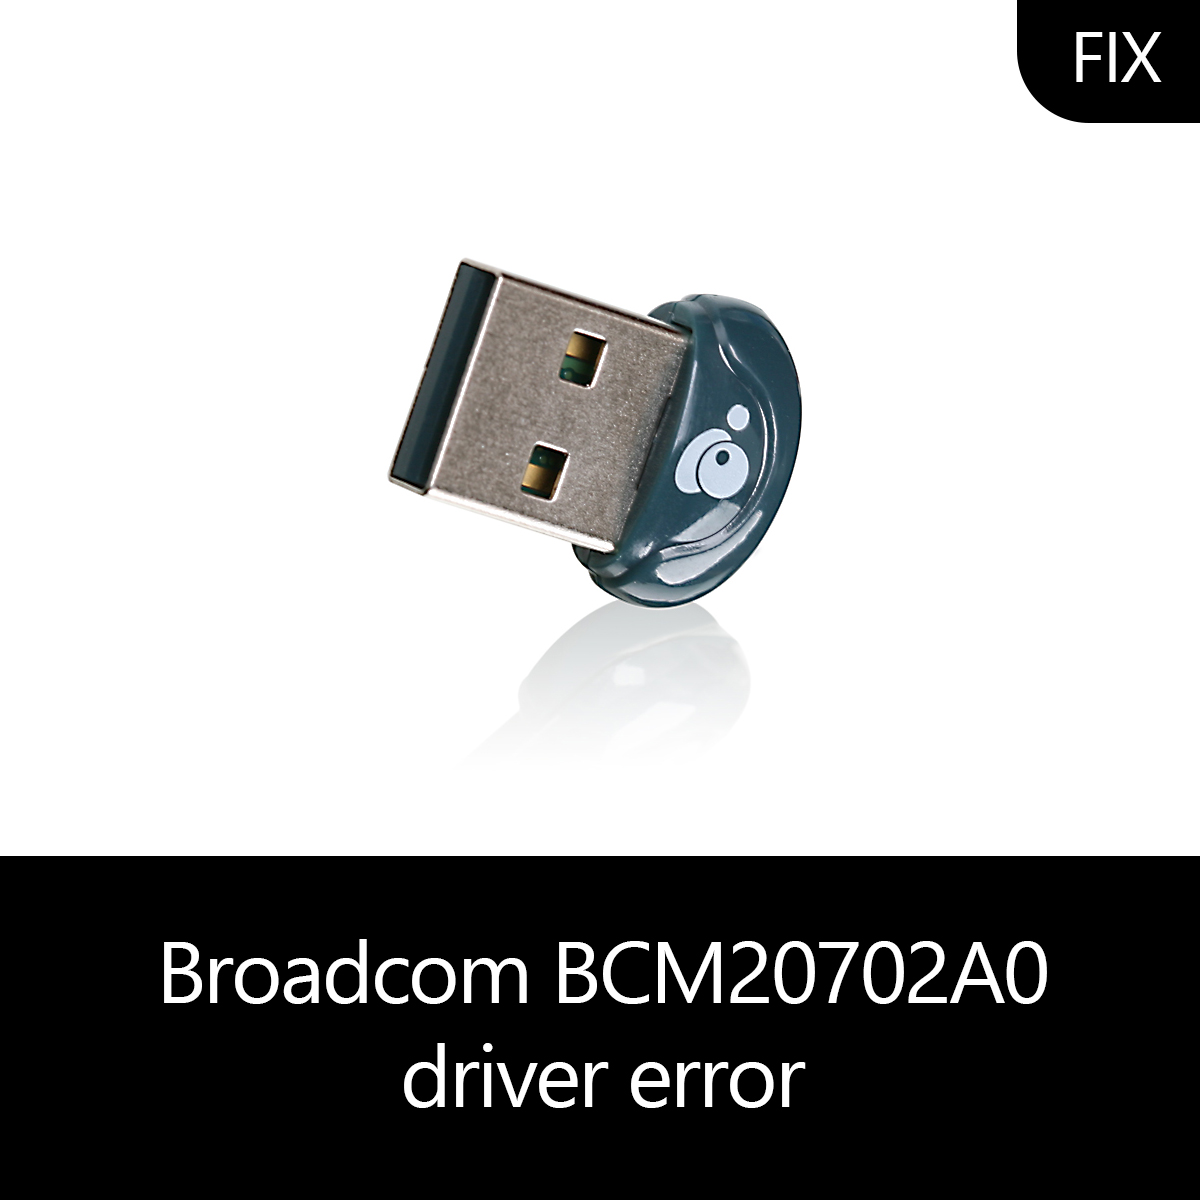 bcm20702a0 driver what is it